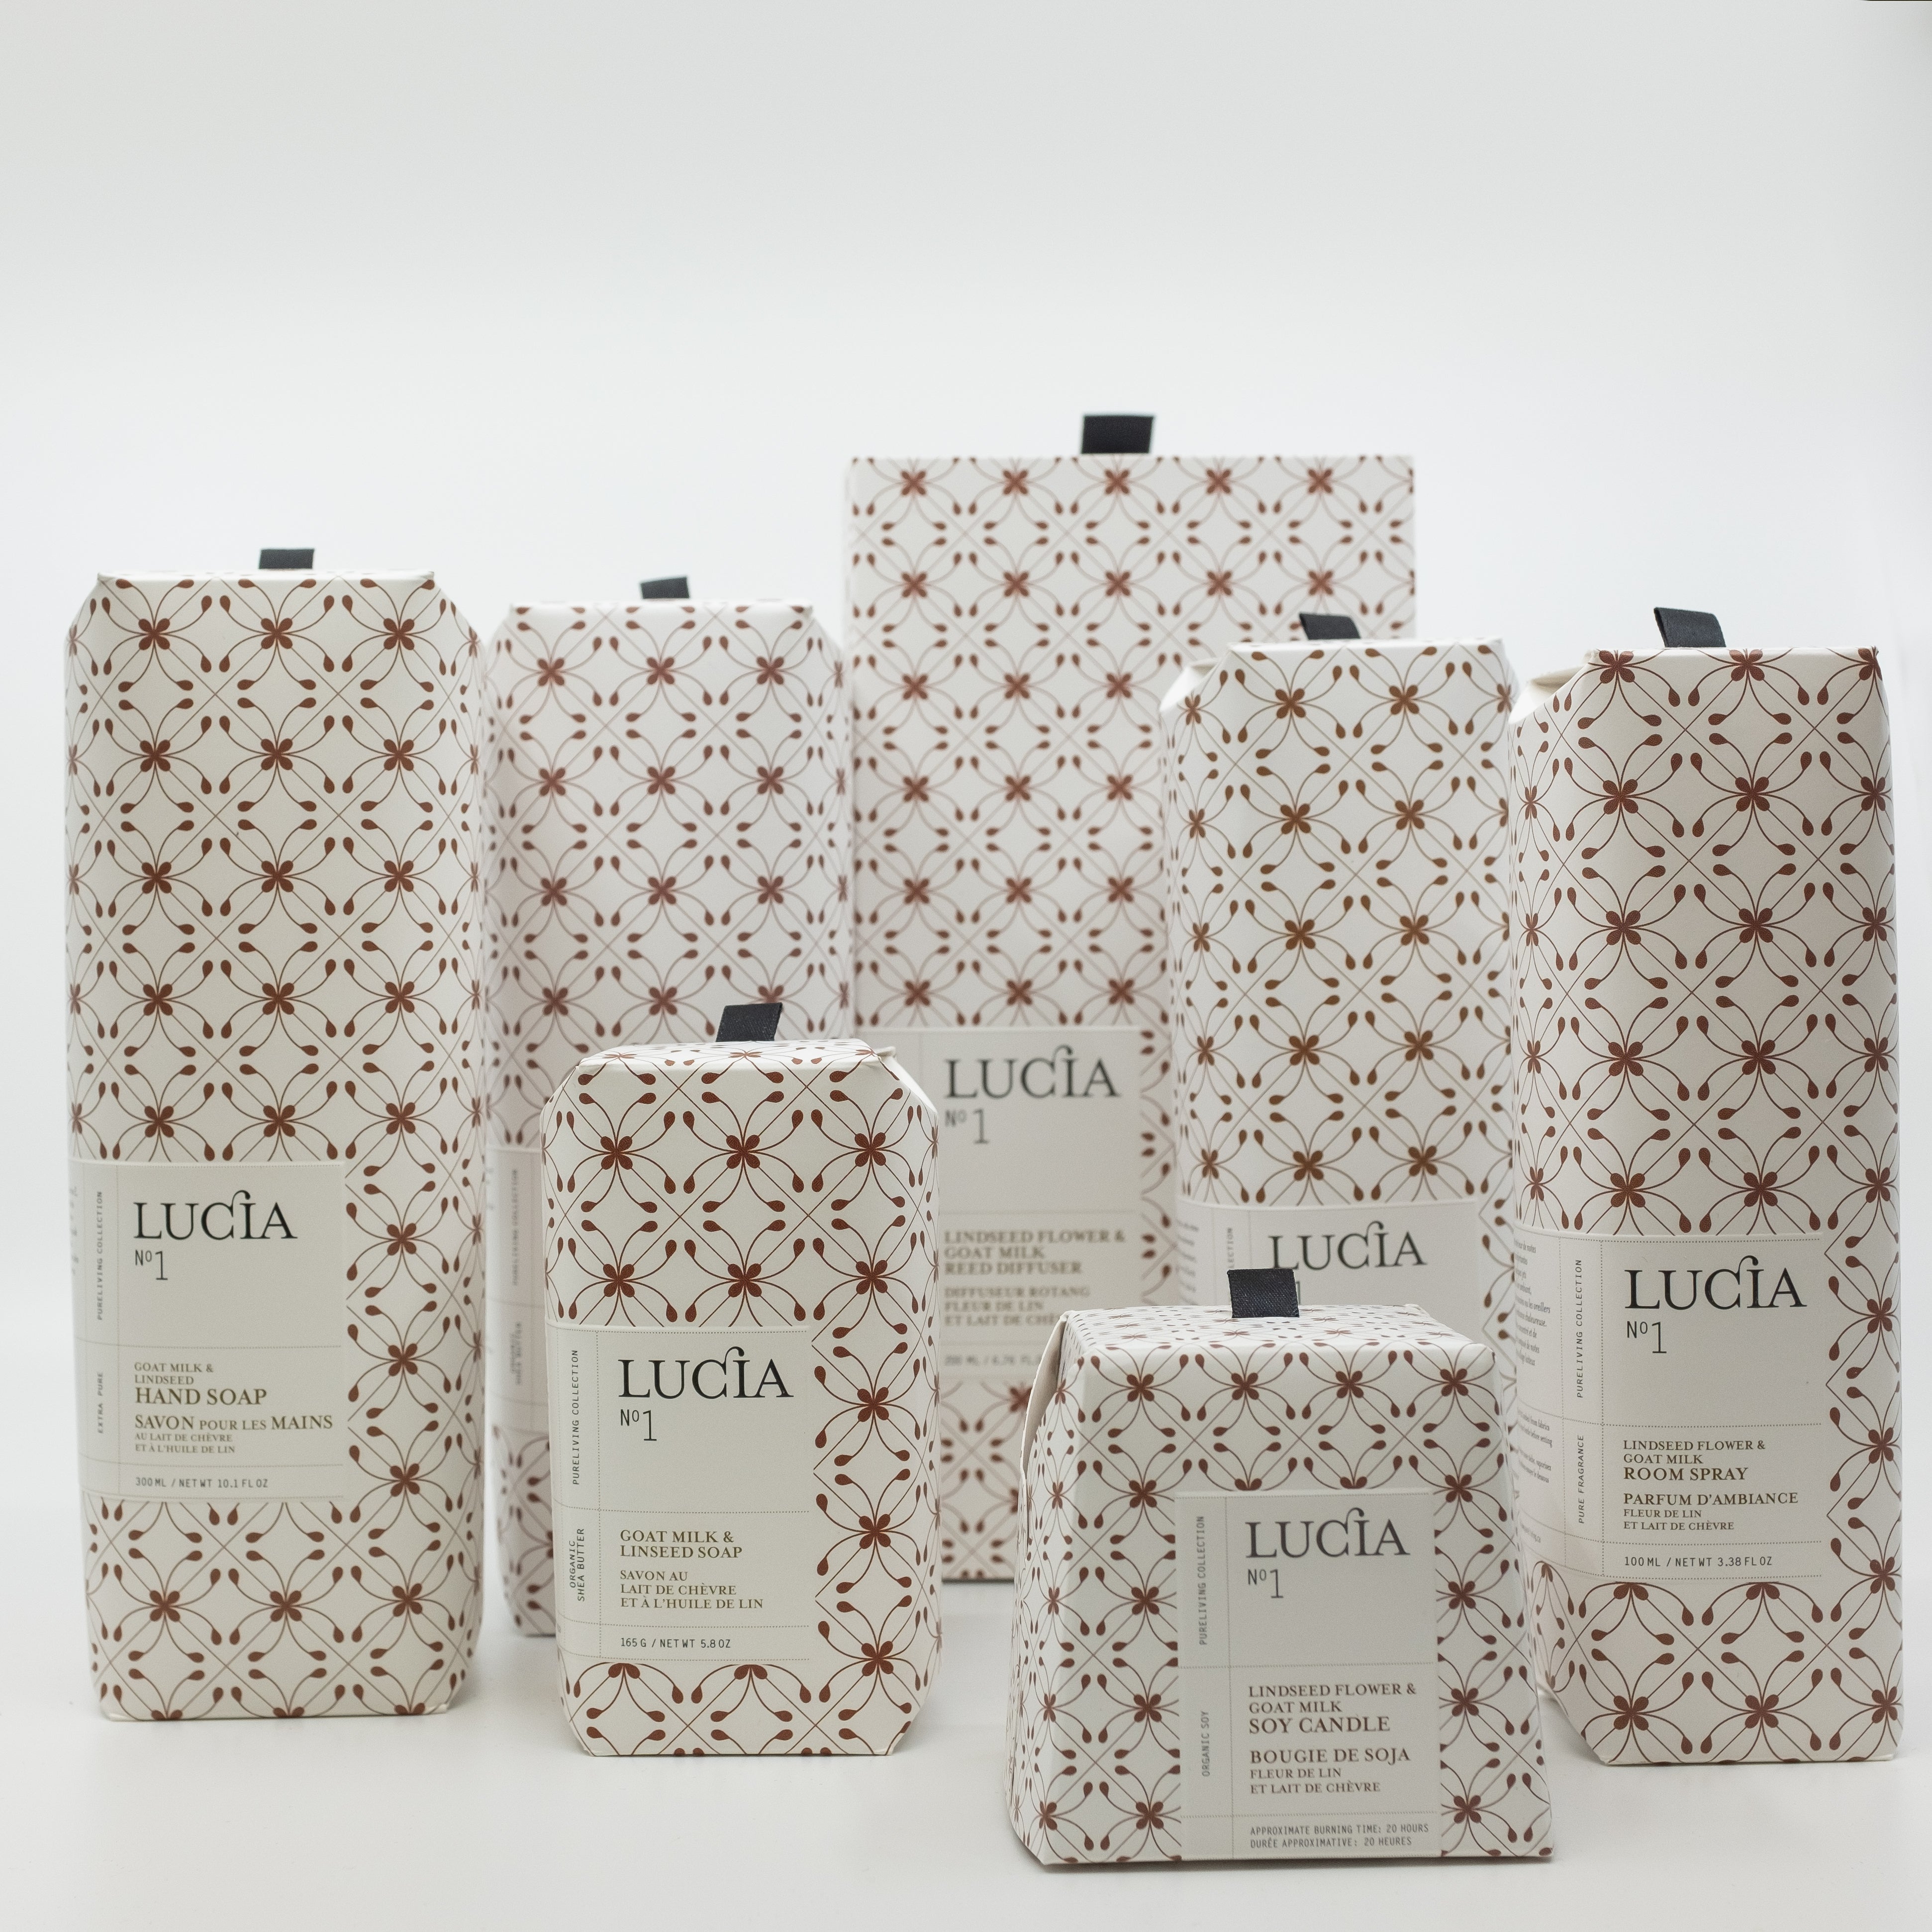 Lucia Linseed Flower & Goat Milk Hand Soap